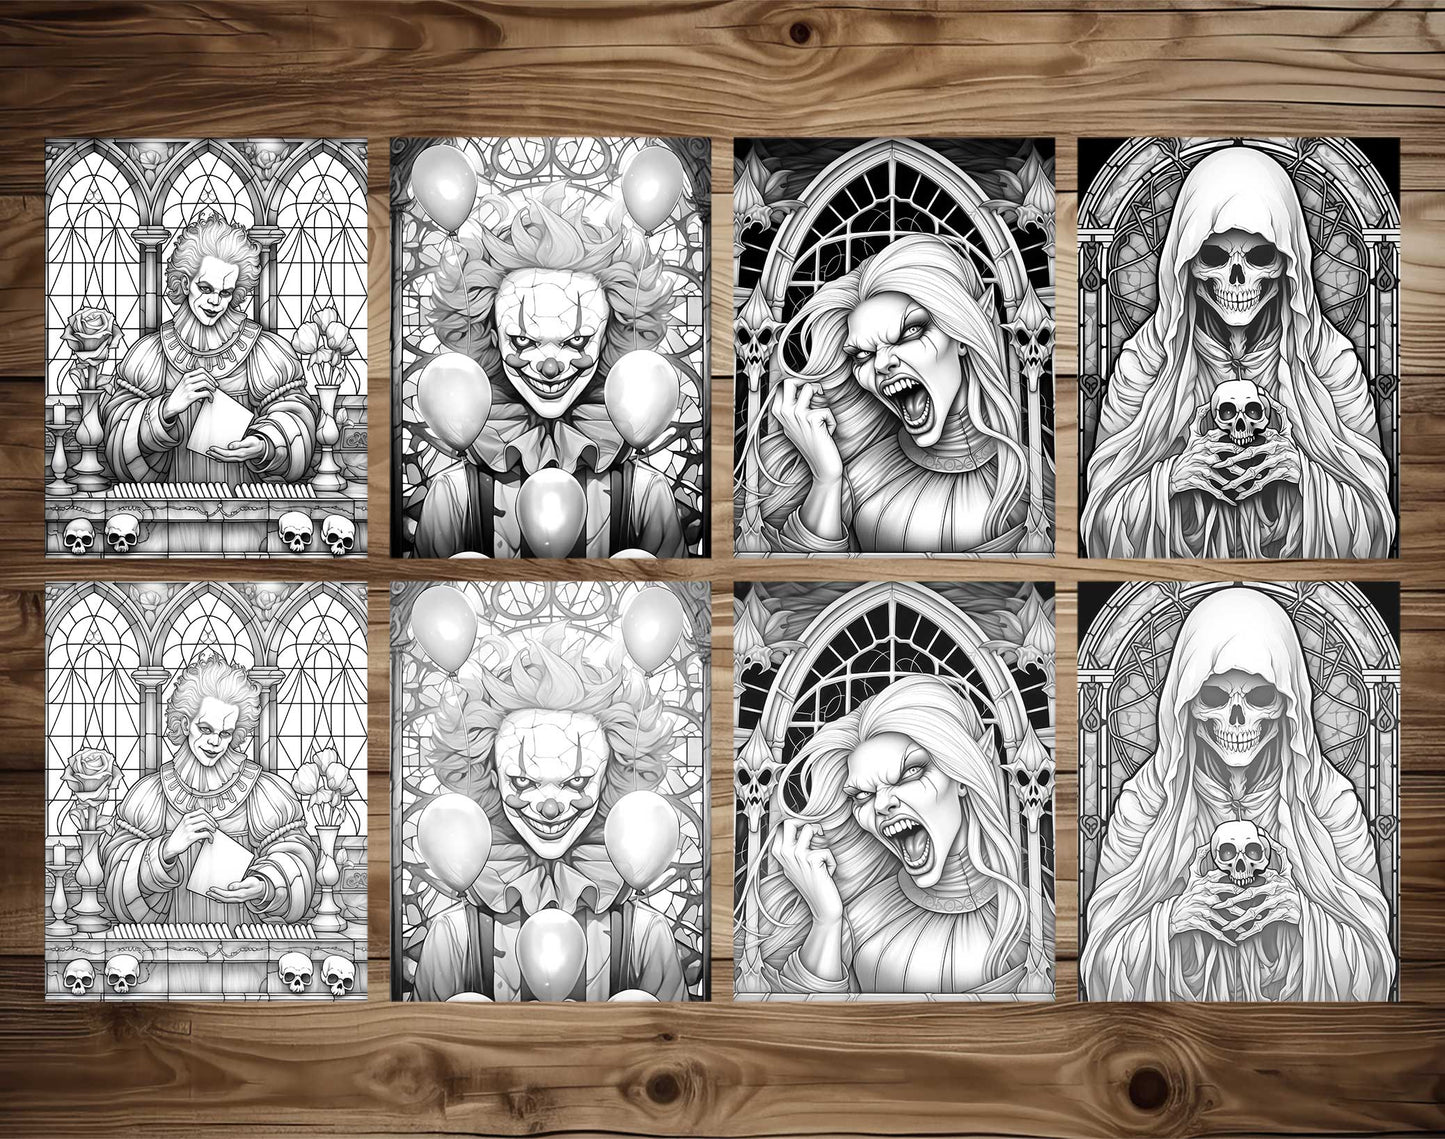 25 Halloween Stained Glass Grayscale Coloring Pages - Instant Download - Printable PDF Dark/Light